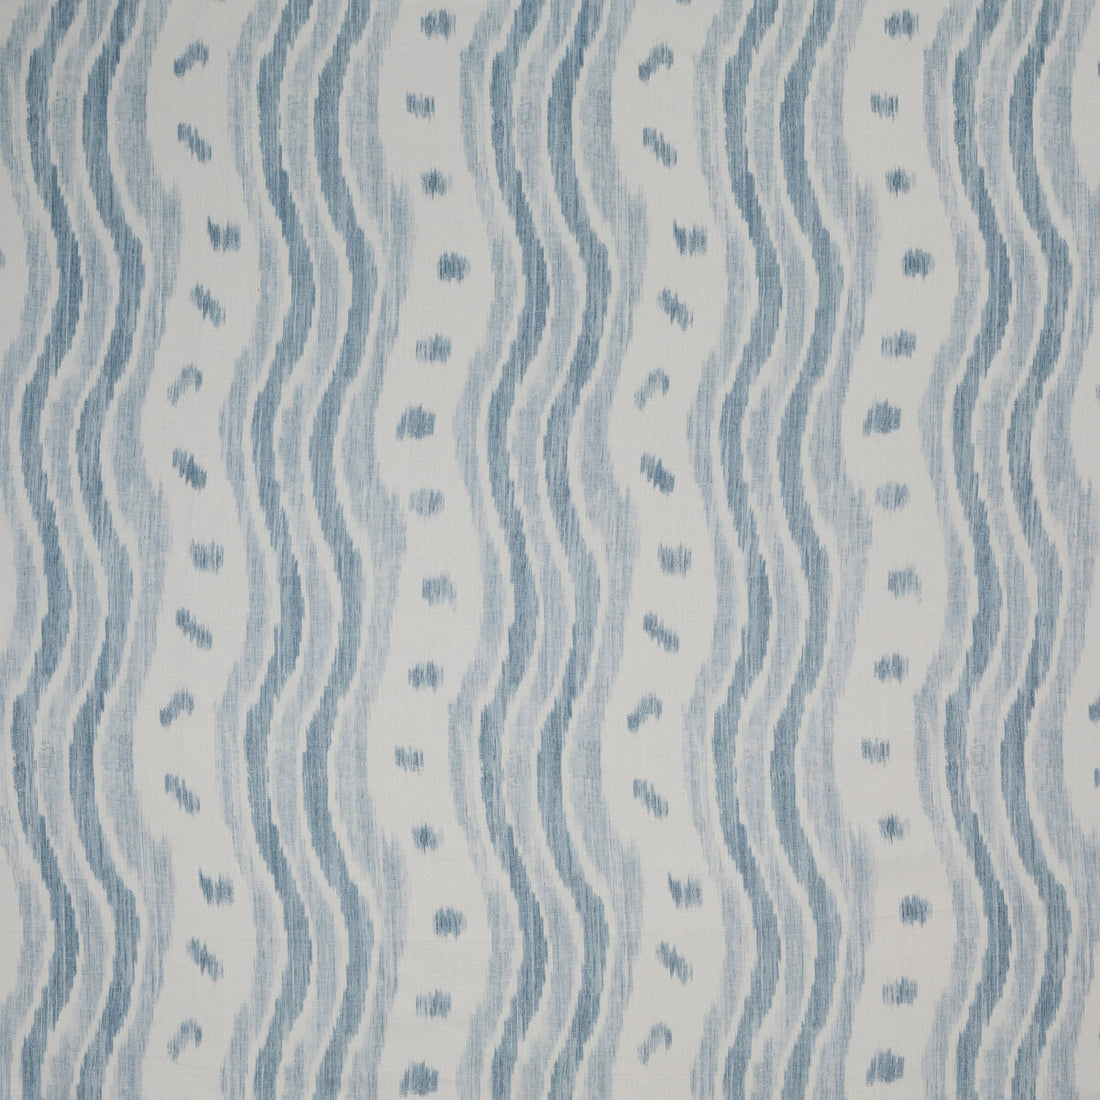 Ikat Stripe fabric in pale blue color - pattern BFC-3687.1115.0 - by Lee Jofa in the Blithfield collection